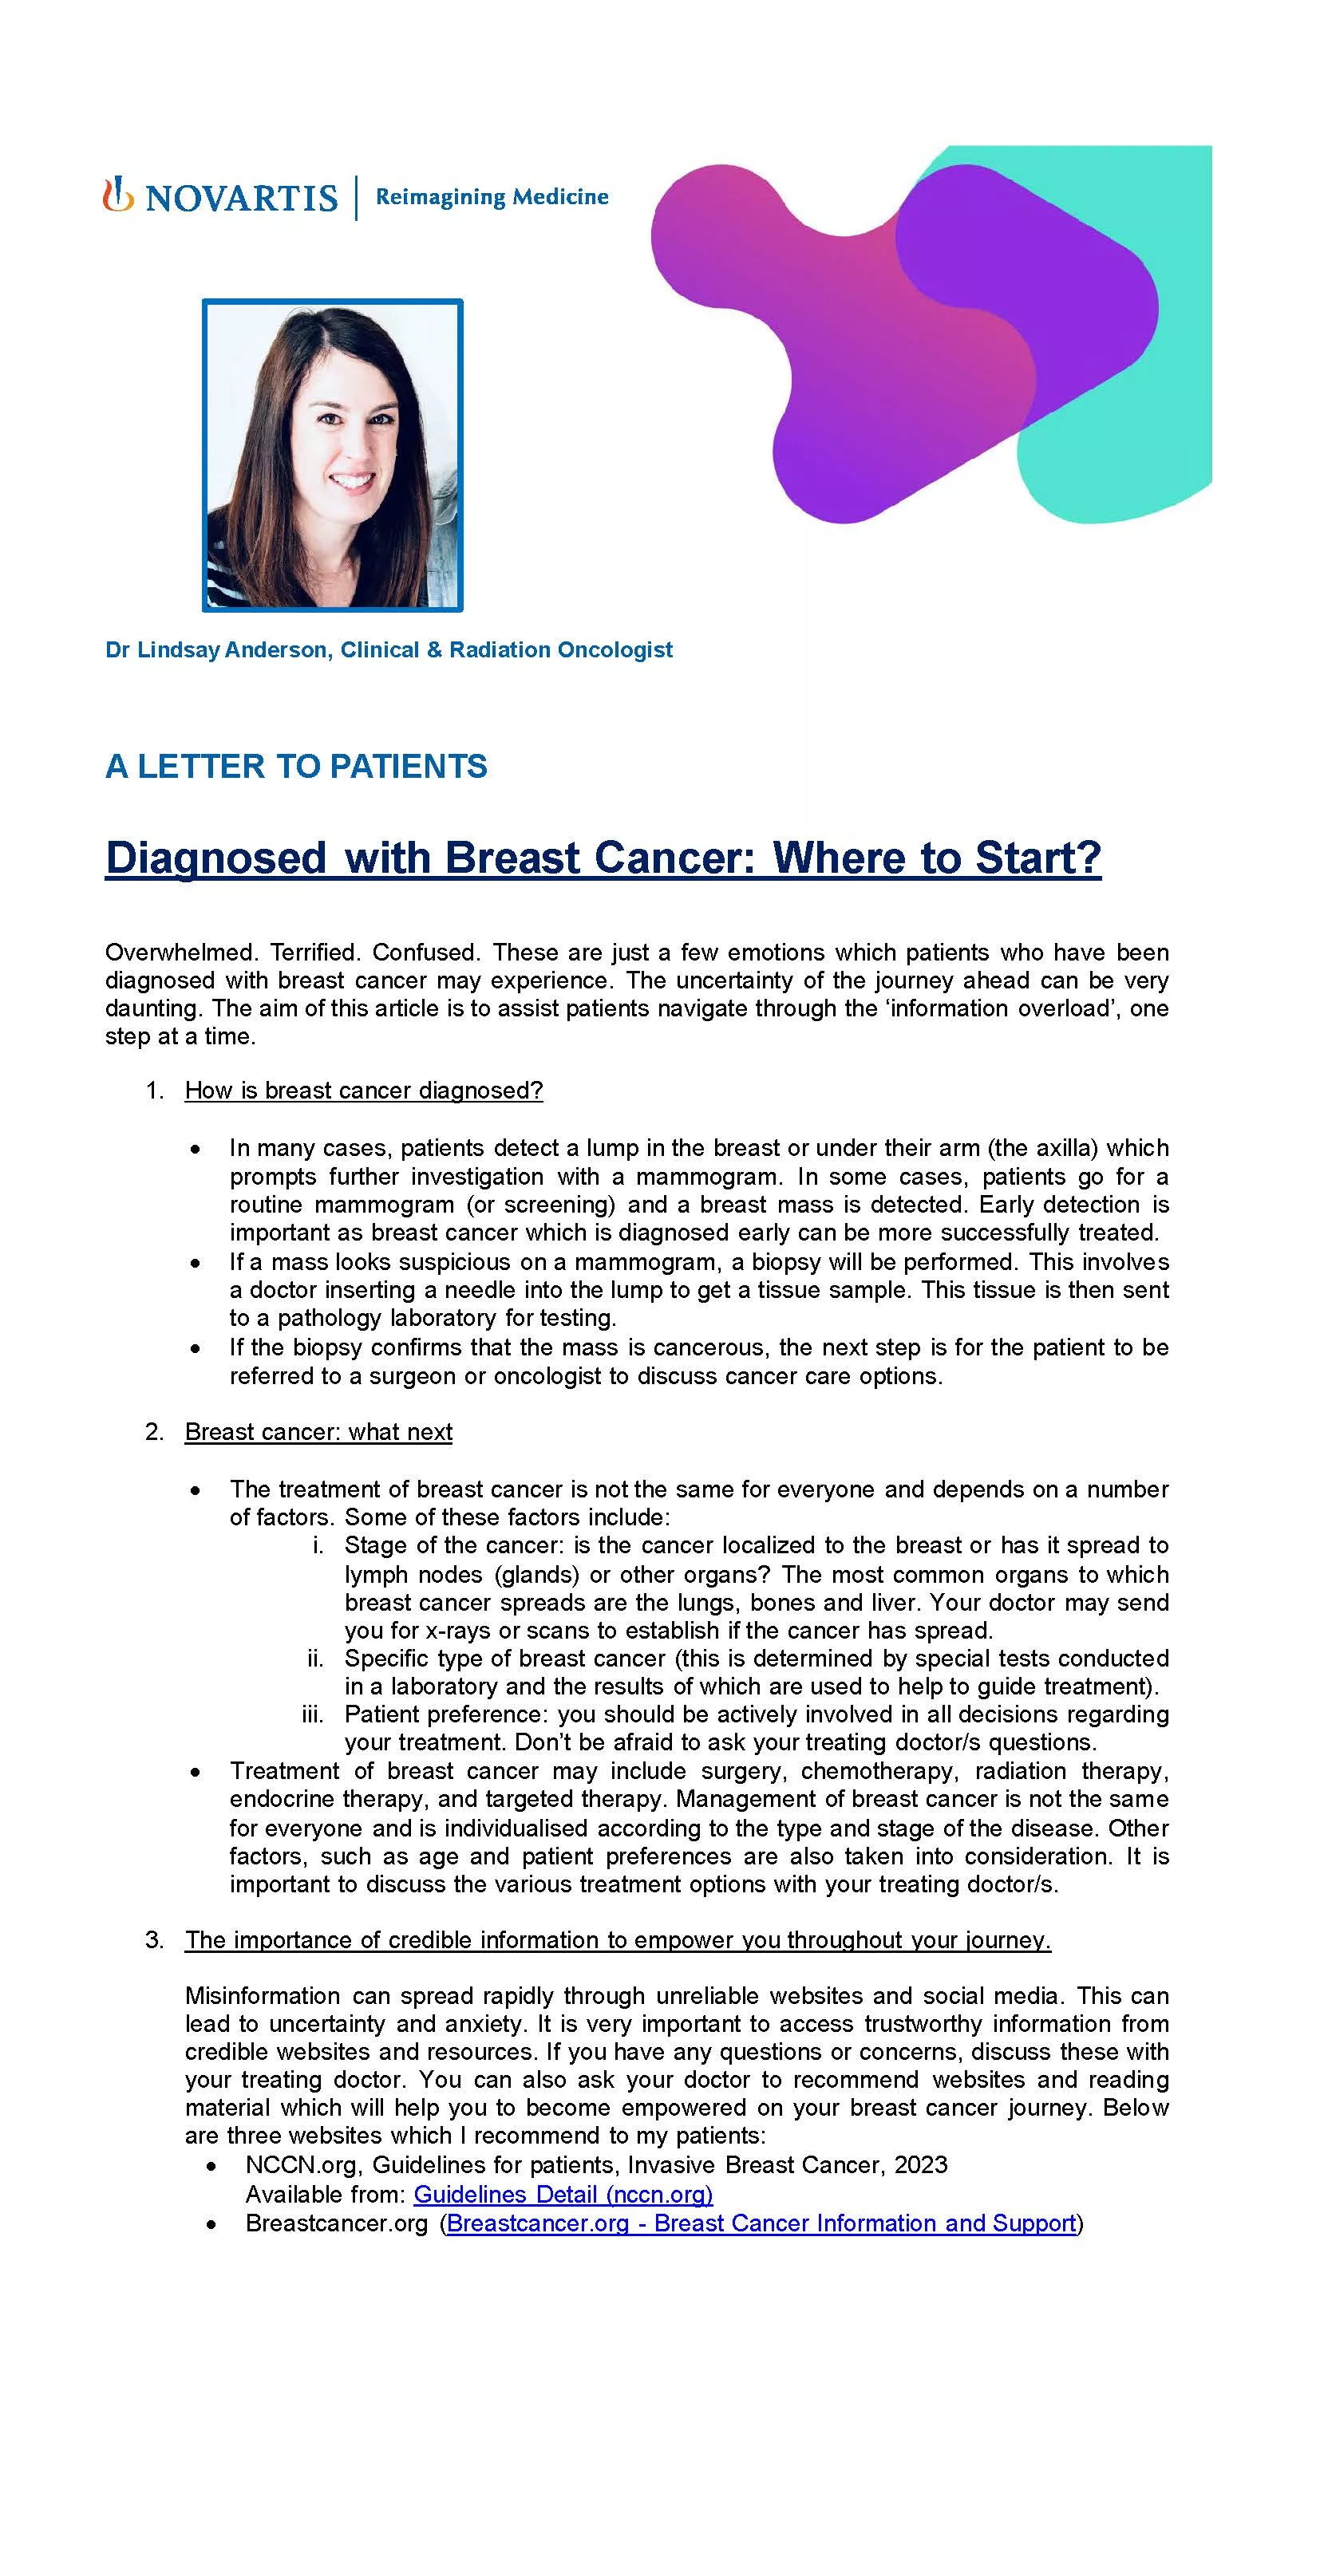 Diagnosed with Breast Cancer Where to Start